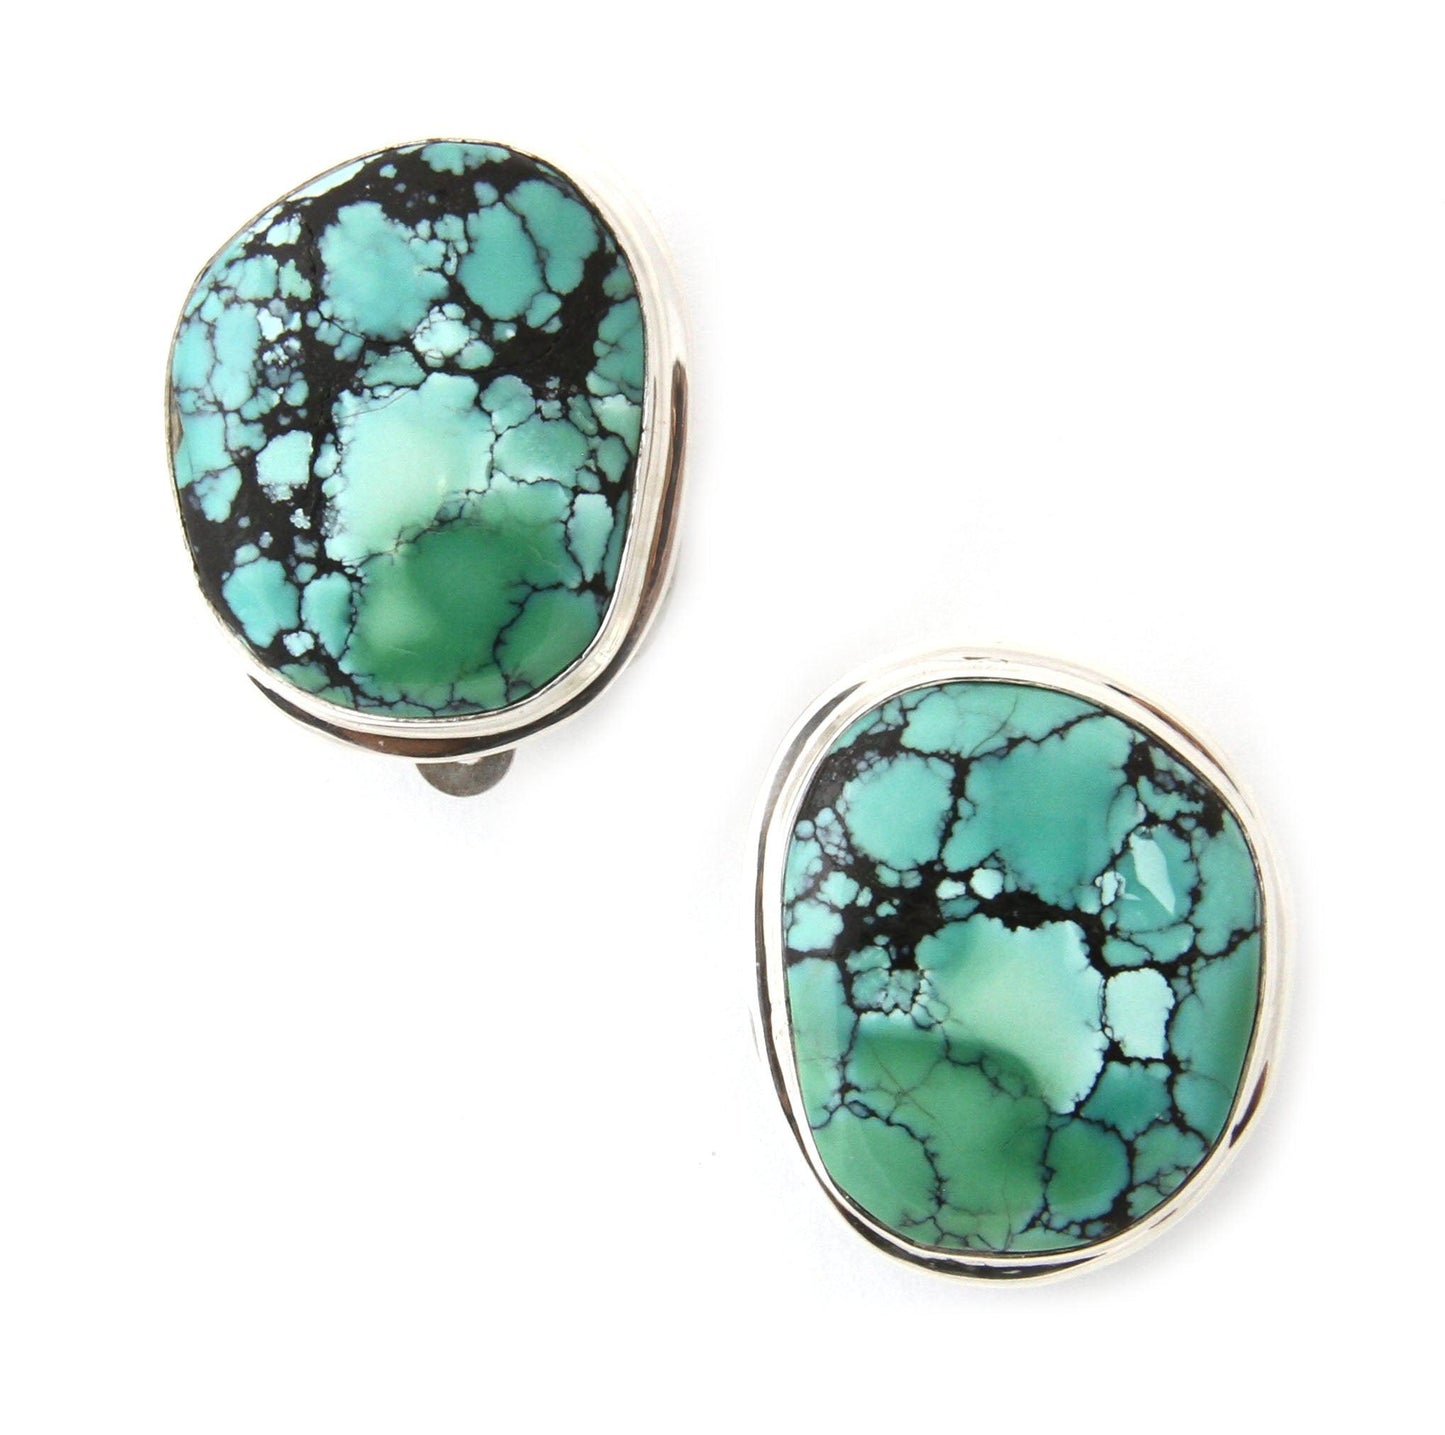 China Mountain Turquoise Clip Earrings-jewelry-Pam Springall-Sorrel Sky Gallery